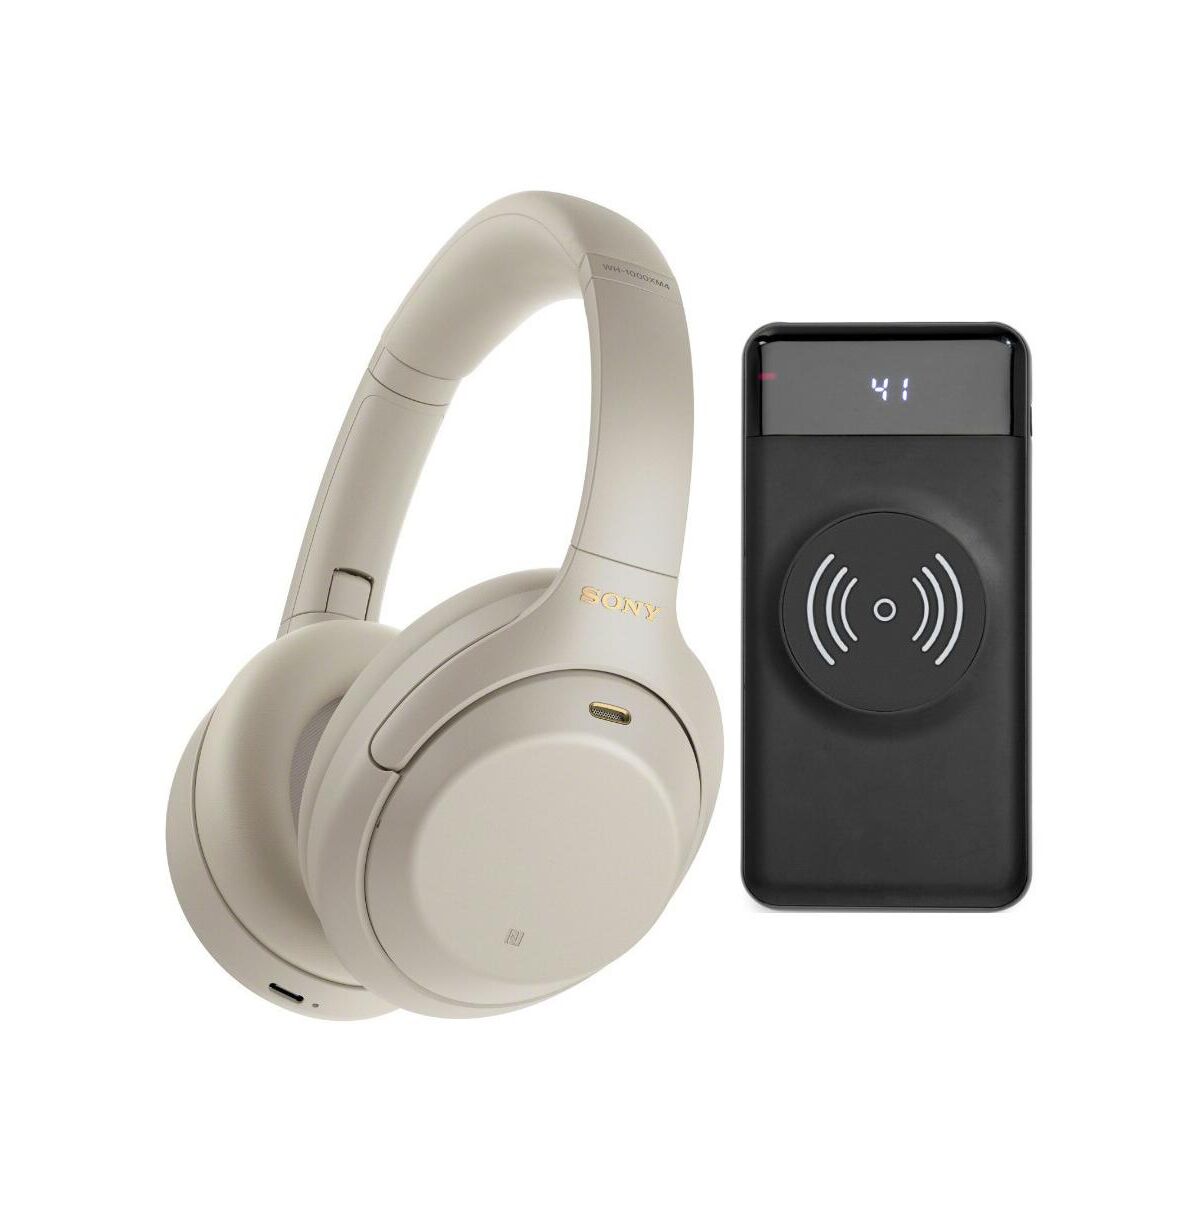 Sony Wh-1000XM4 Wireless Noise Canceling Over-Ear Headphones (Silver) Bundle - White